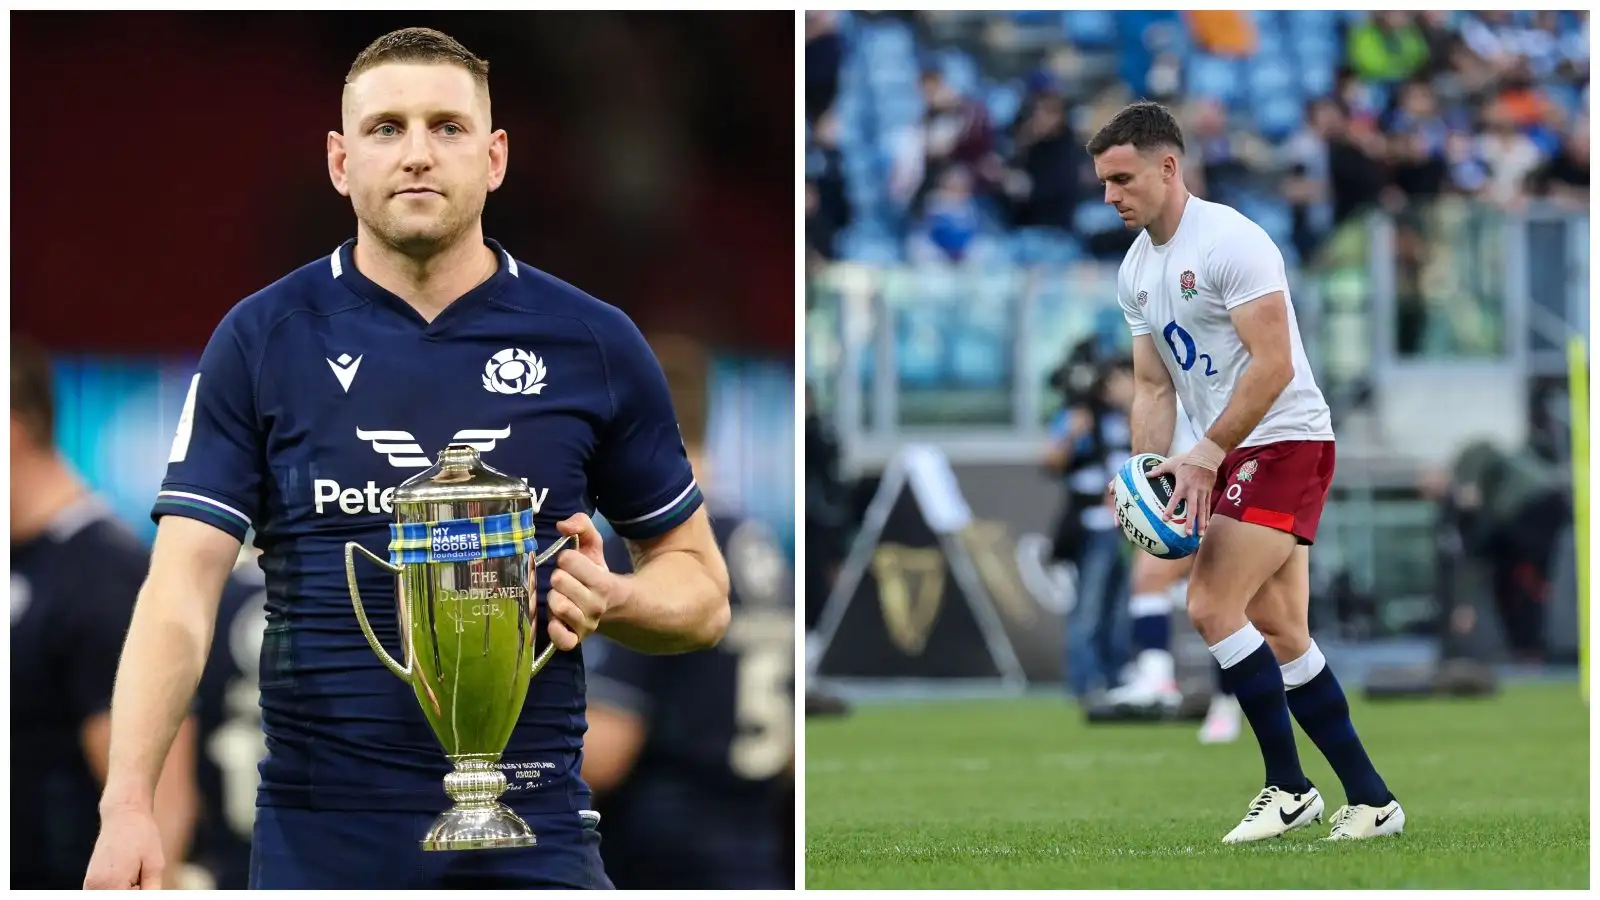 Split with Scotland's Finn Russell and George Ford of England.